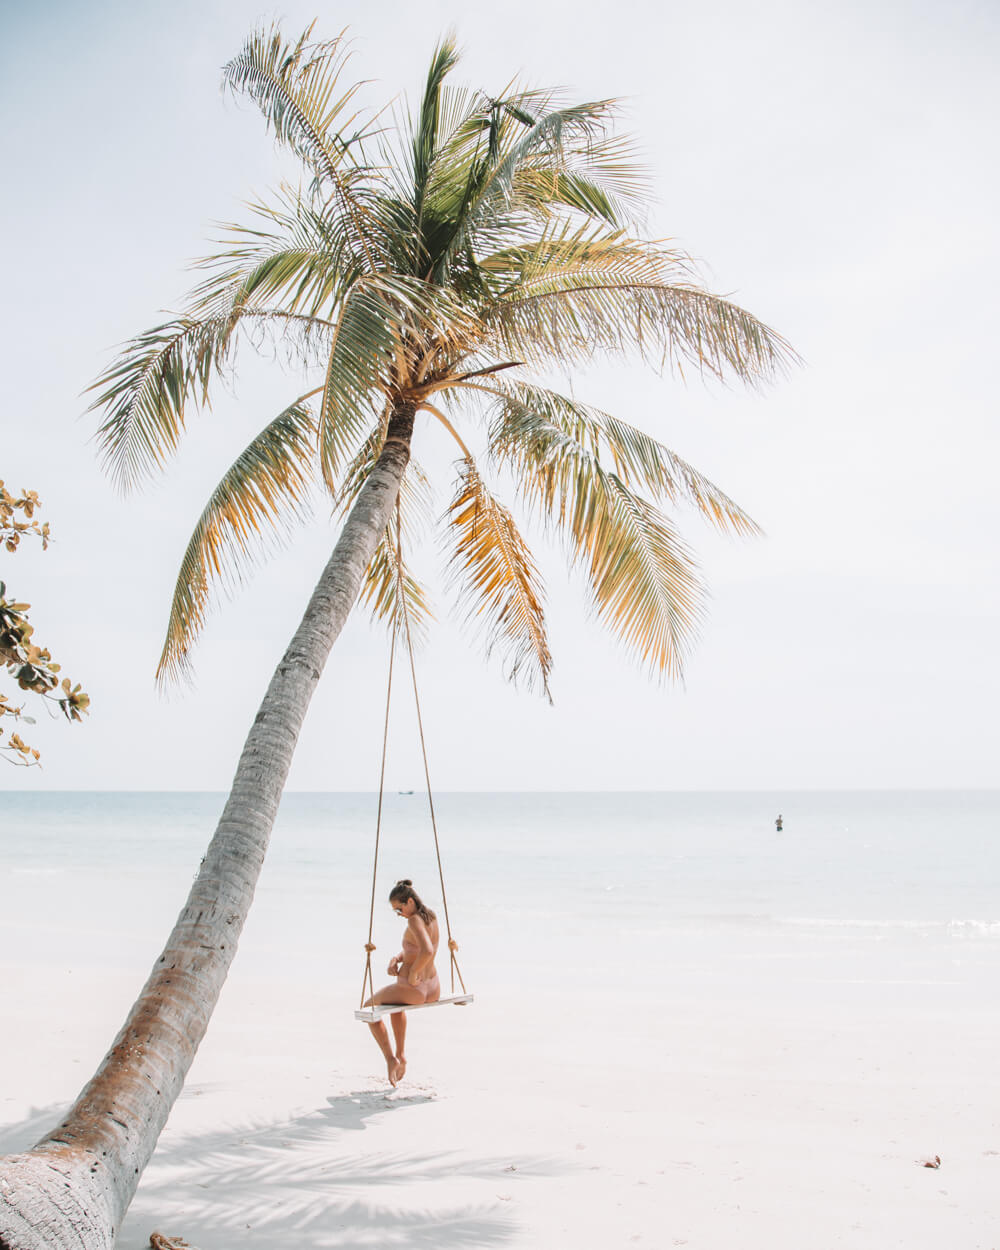 Hanging out on a Palm tree beach swing in the Bahamas